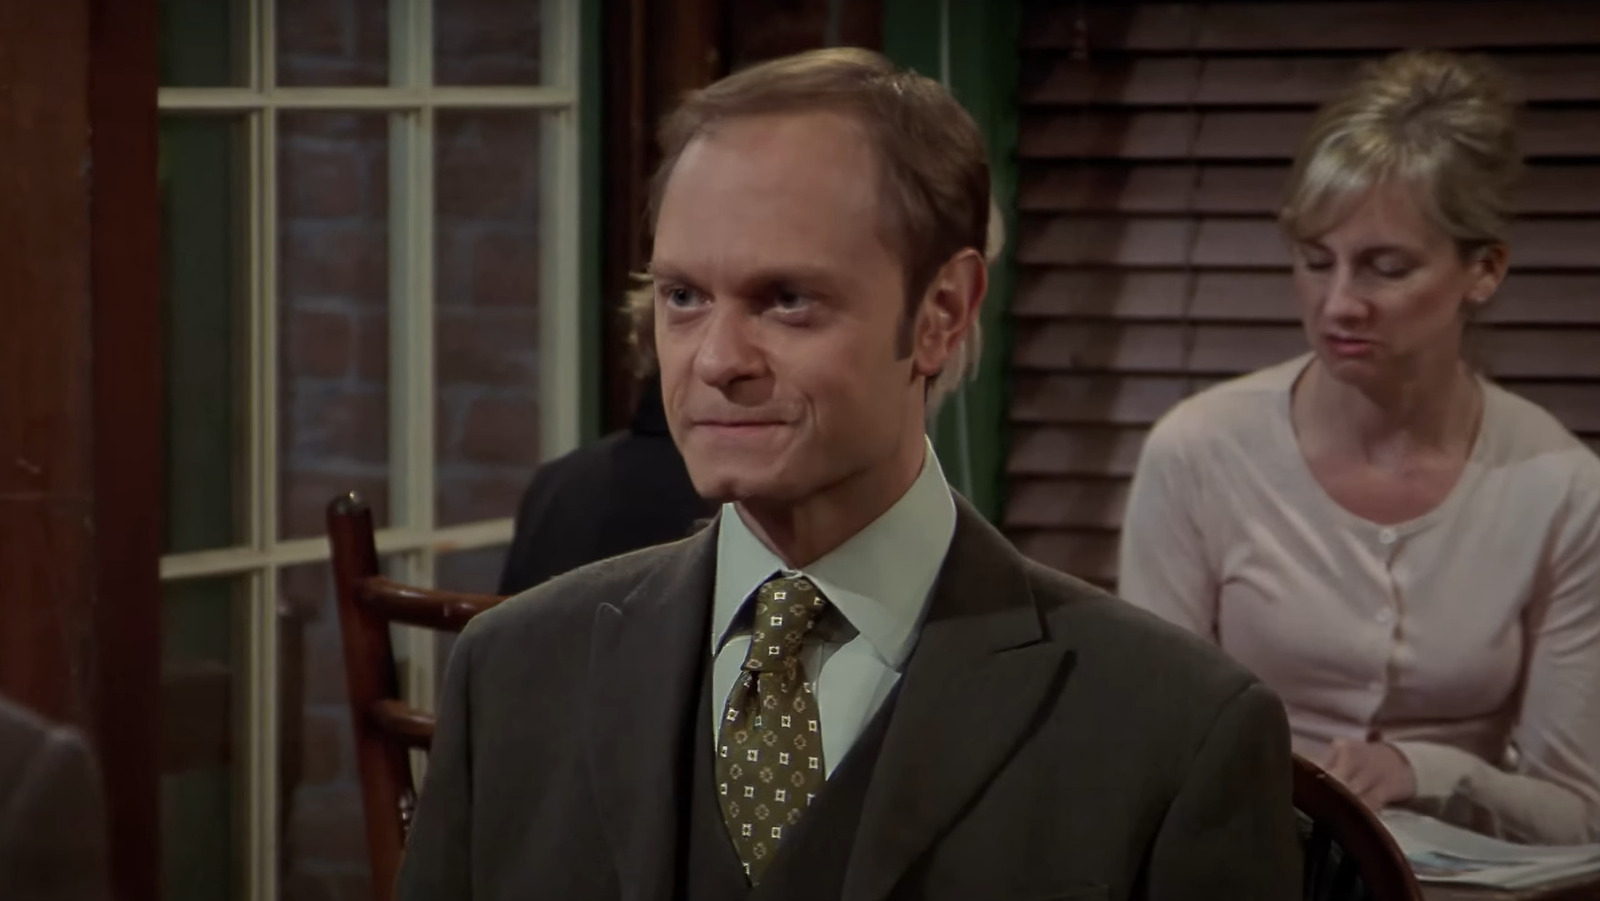 What Happened To Niles #39 Ex Wife Maris On Frasier Is Really Messed Up